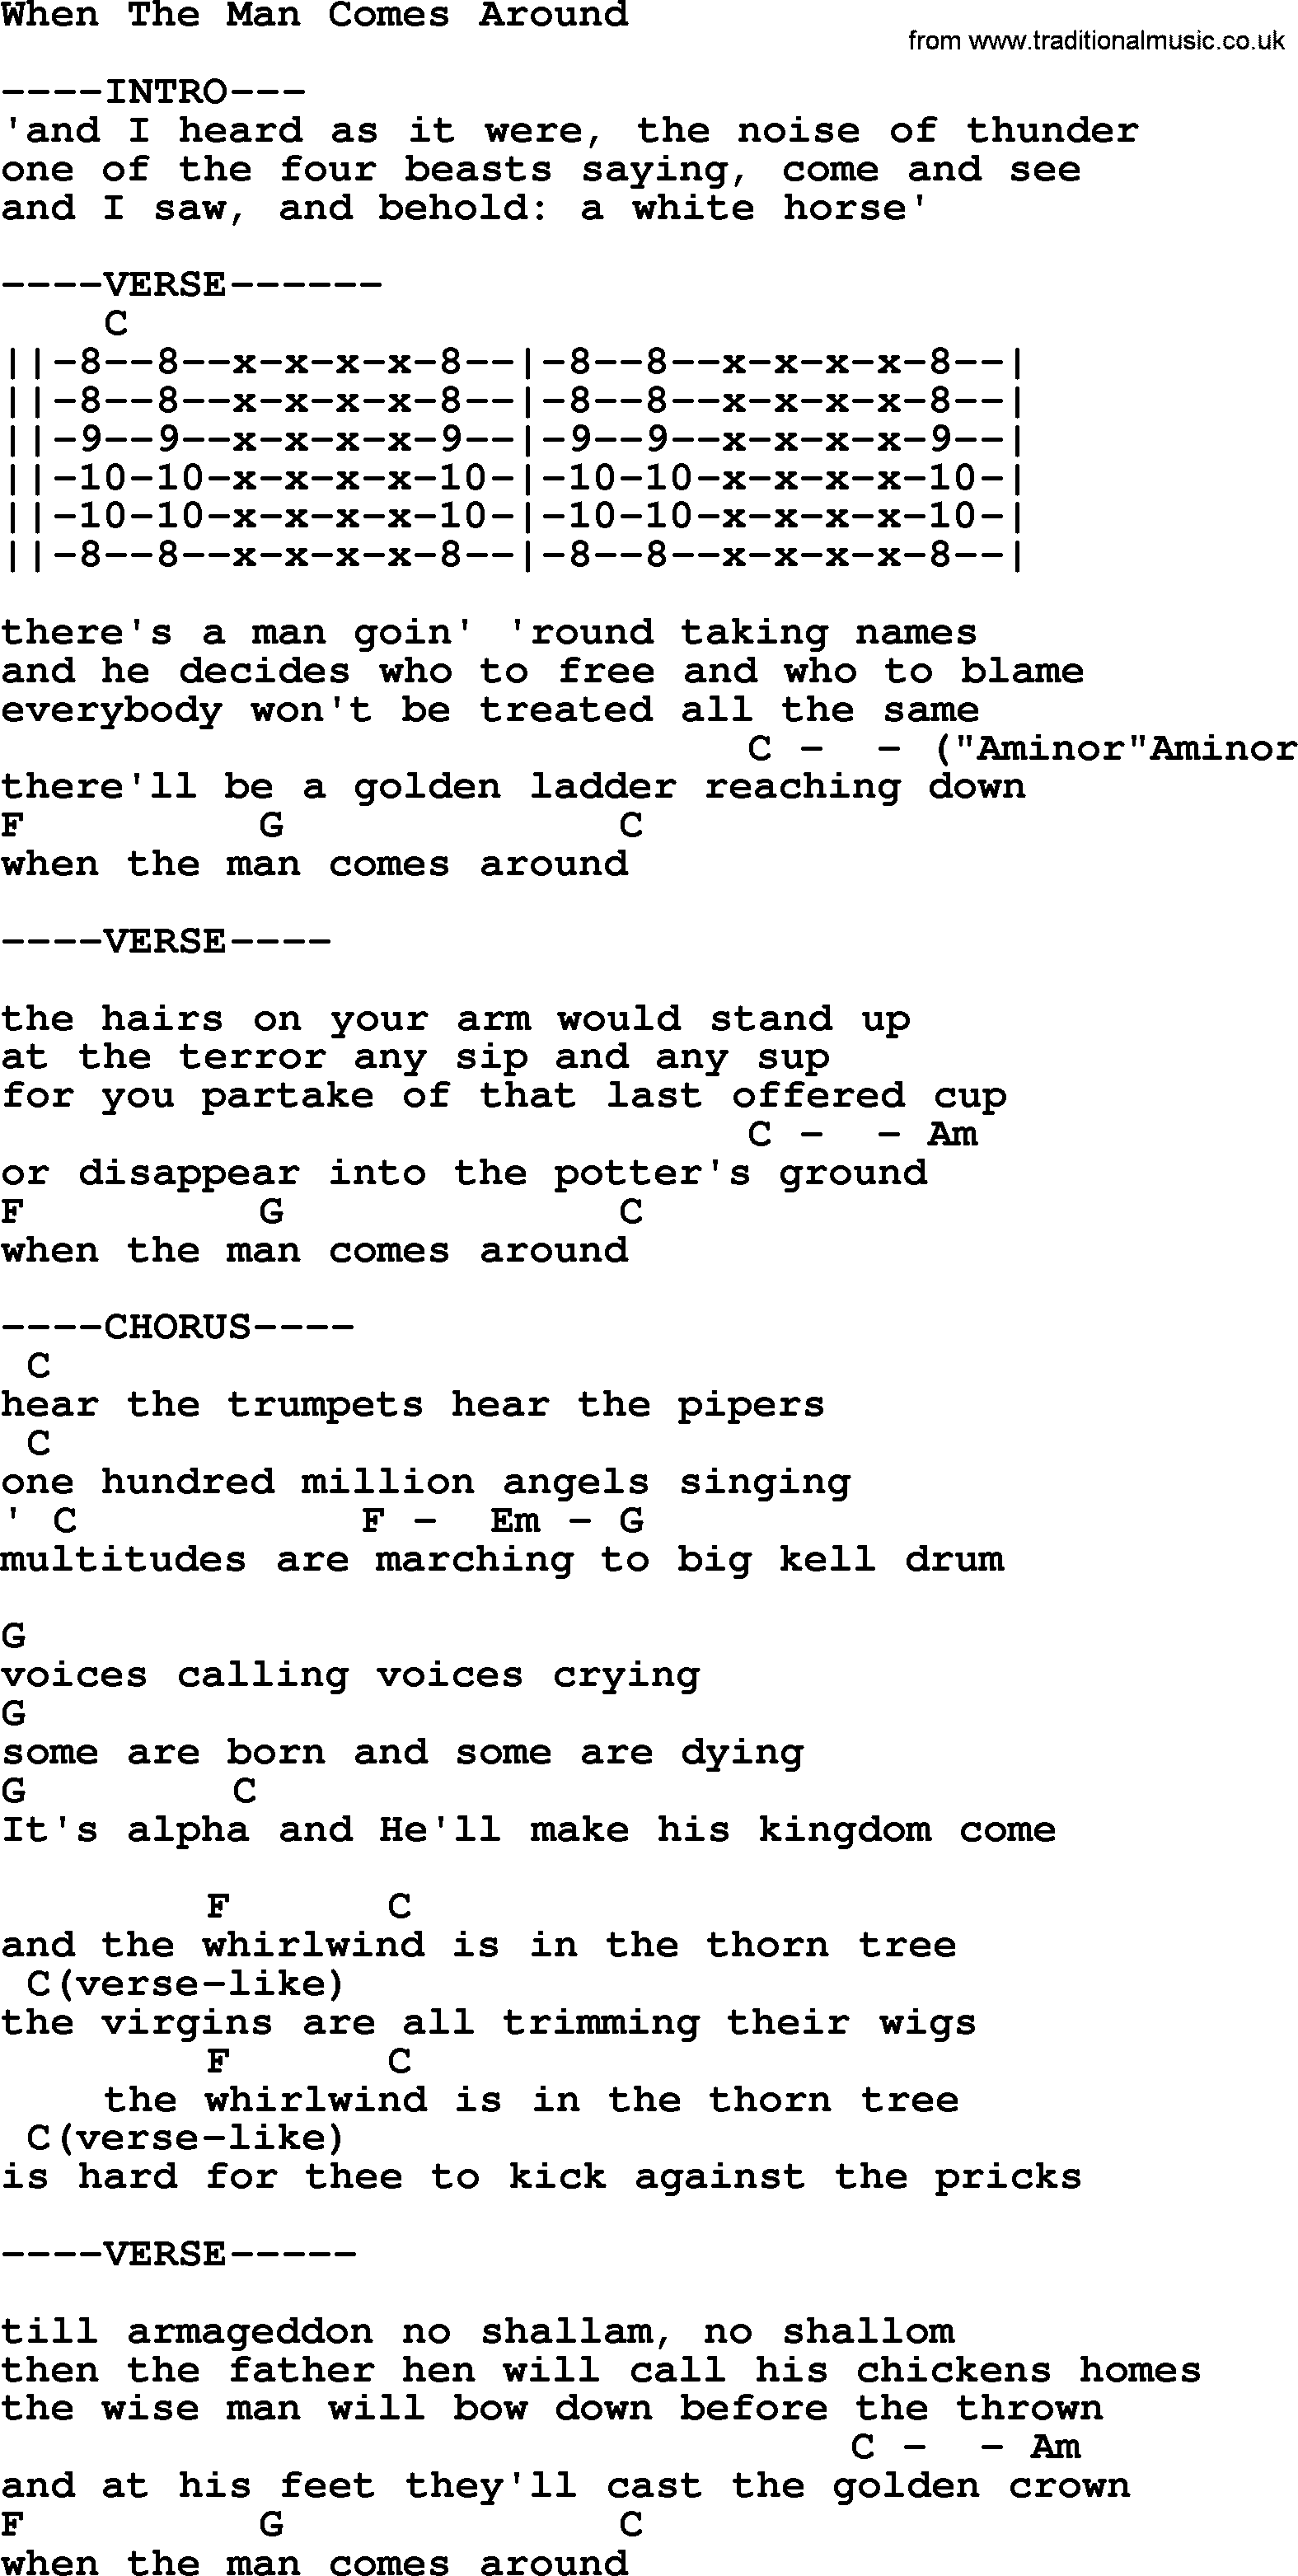 Johnny Cash Song When The Man Comes Around Lyrics And Chords